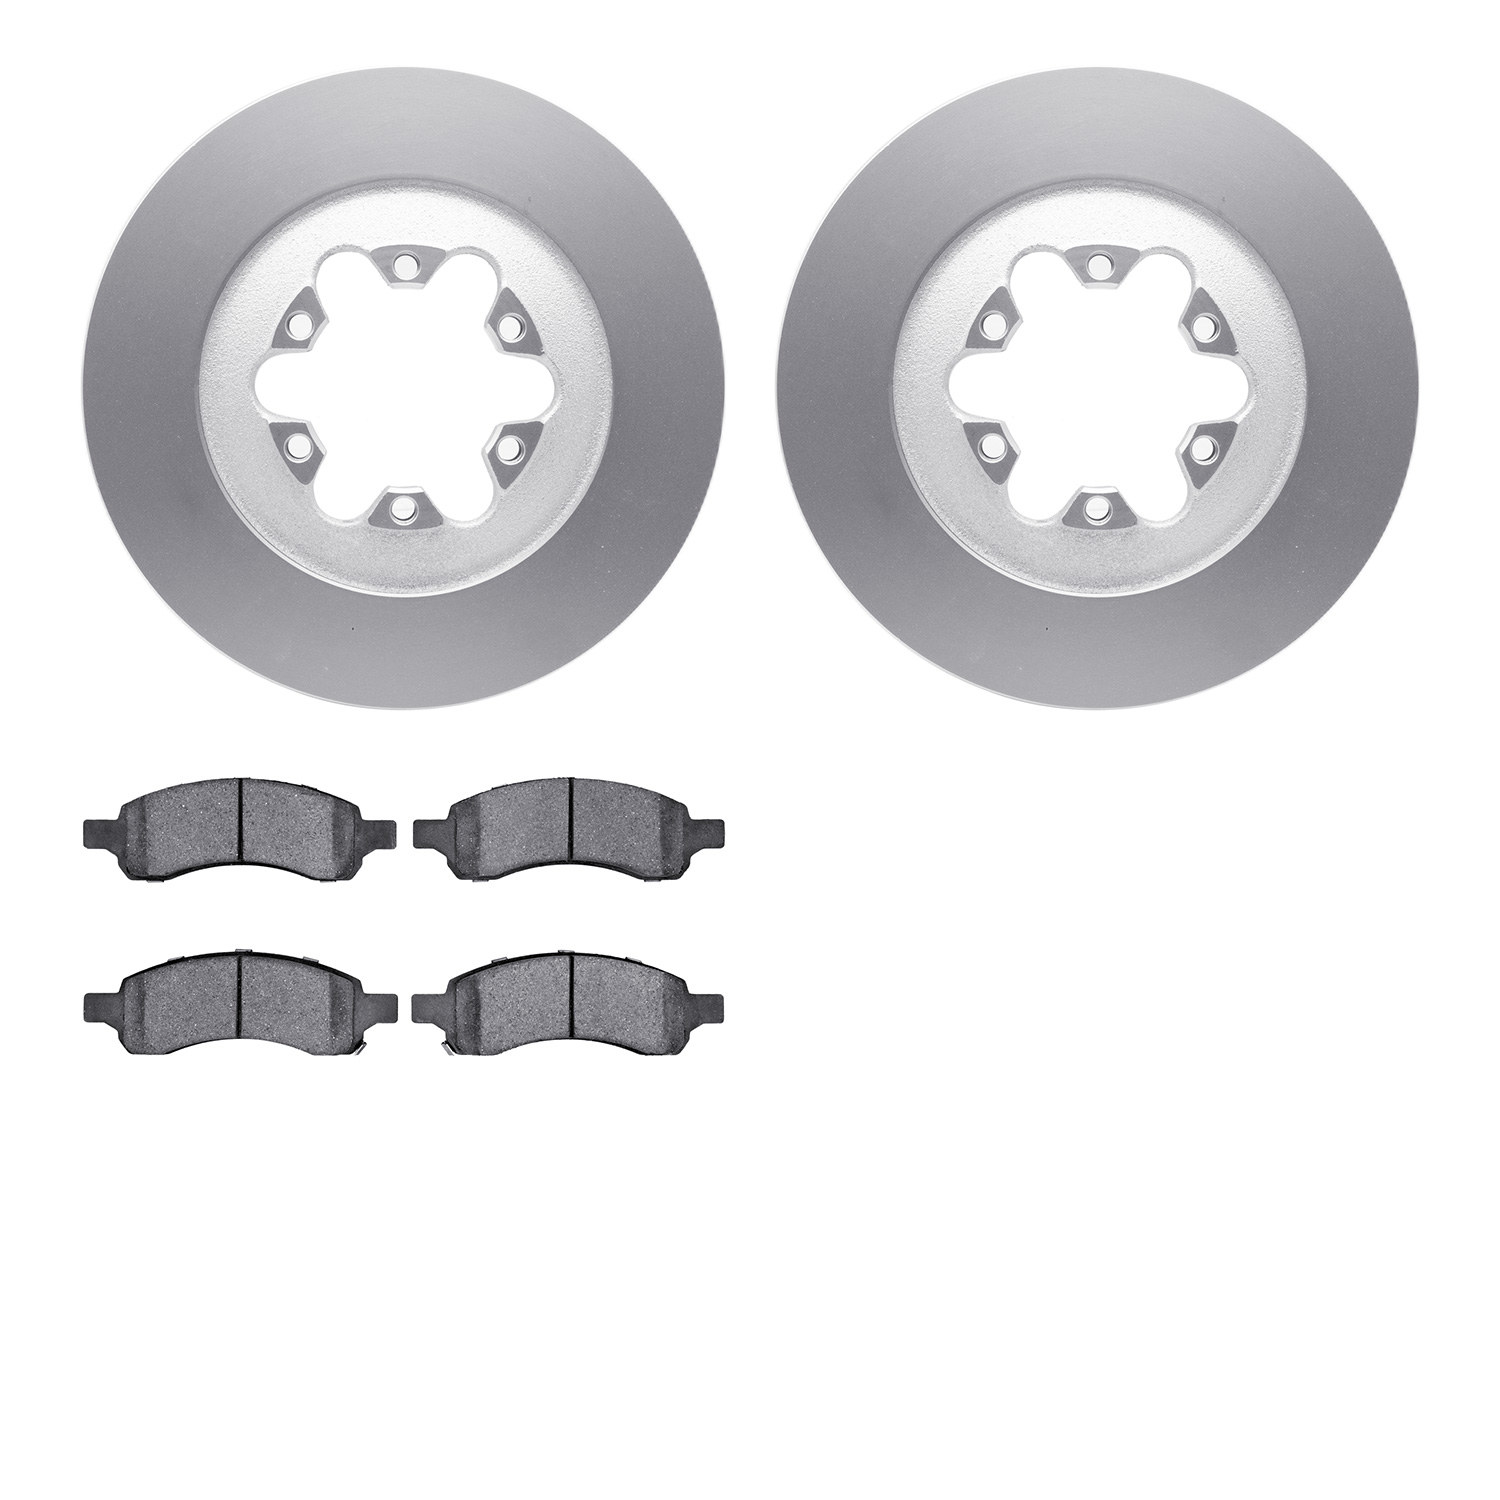 4402-48029 Geospec Brake Rotors with Ultimate-Duty Brake Pads Kit, 2009-2012 GM, Position: Front